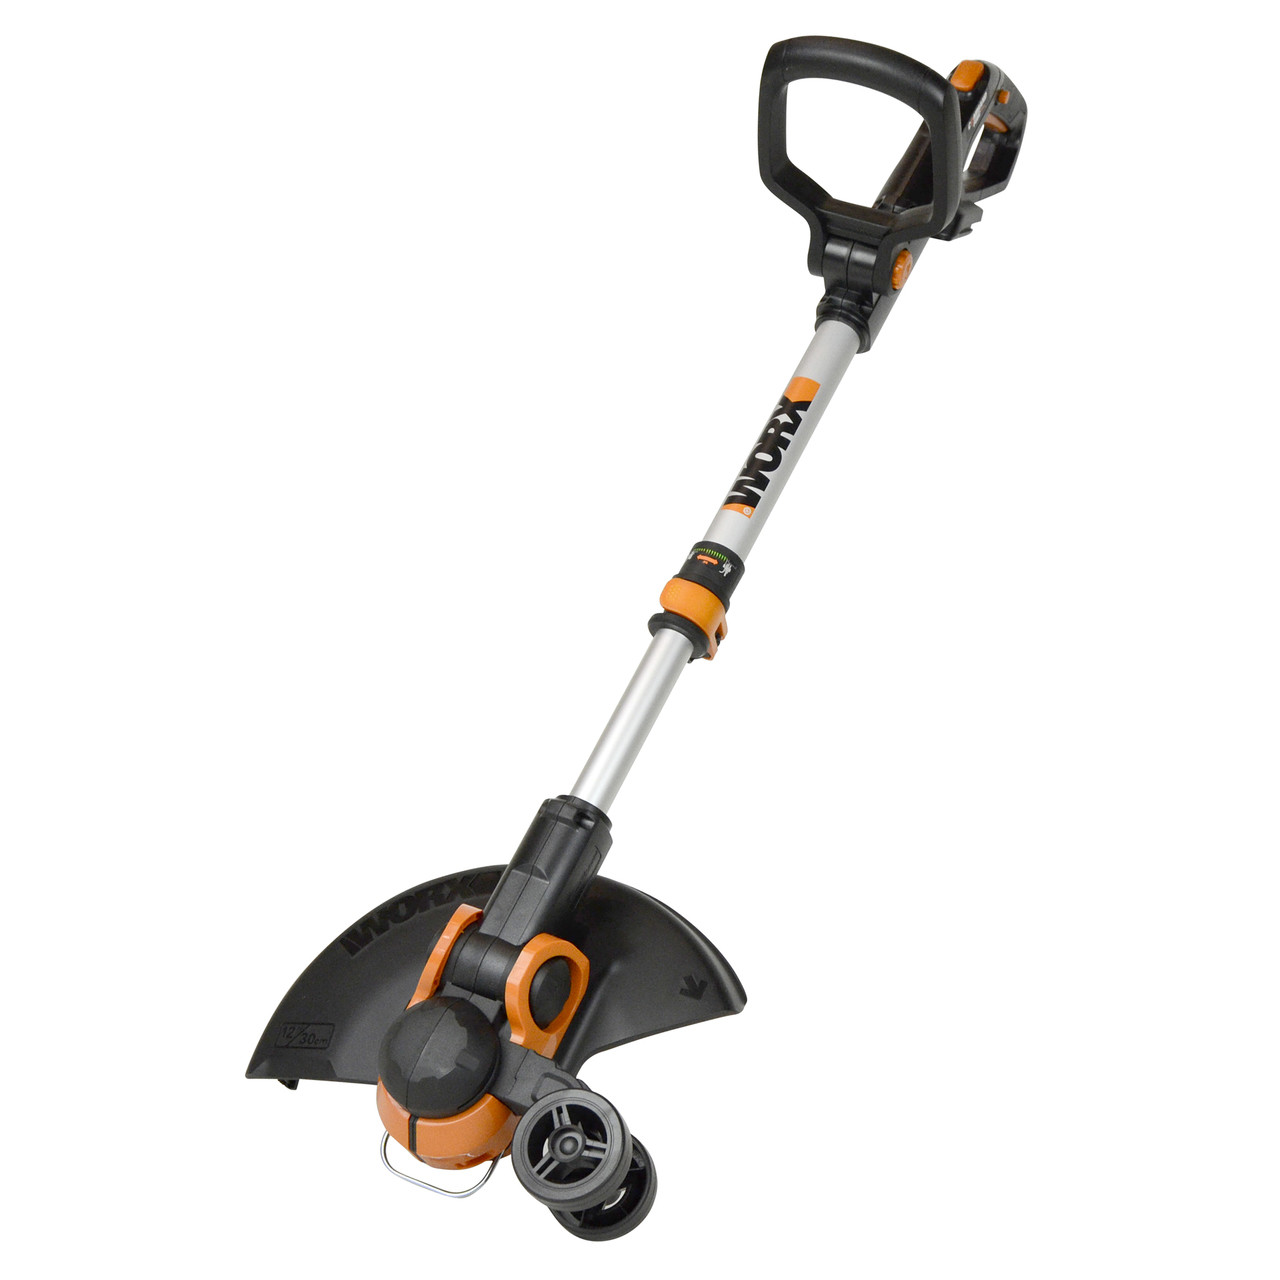 How To String A Worx Trimmer